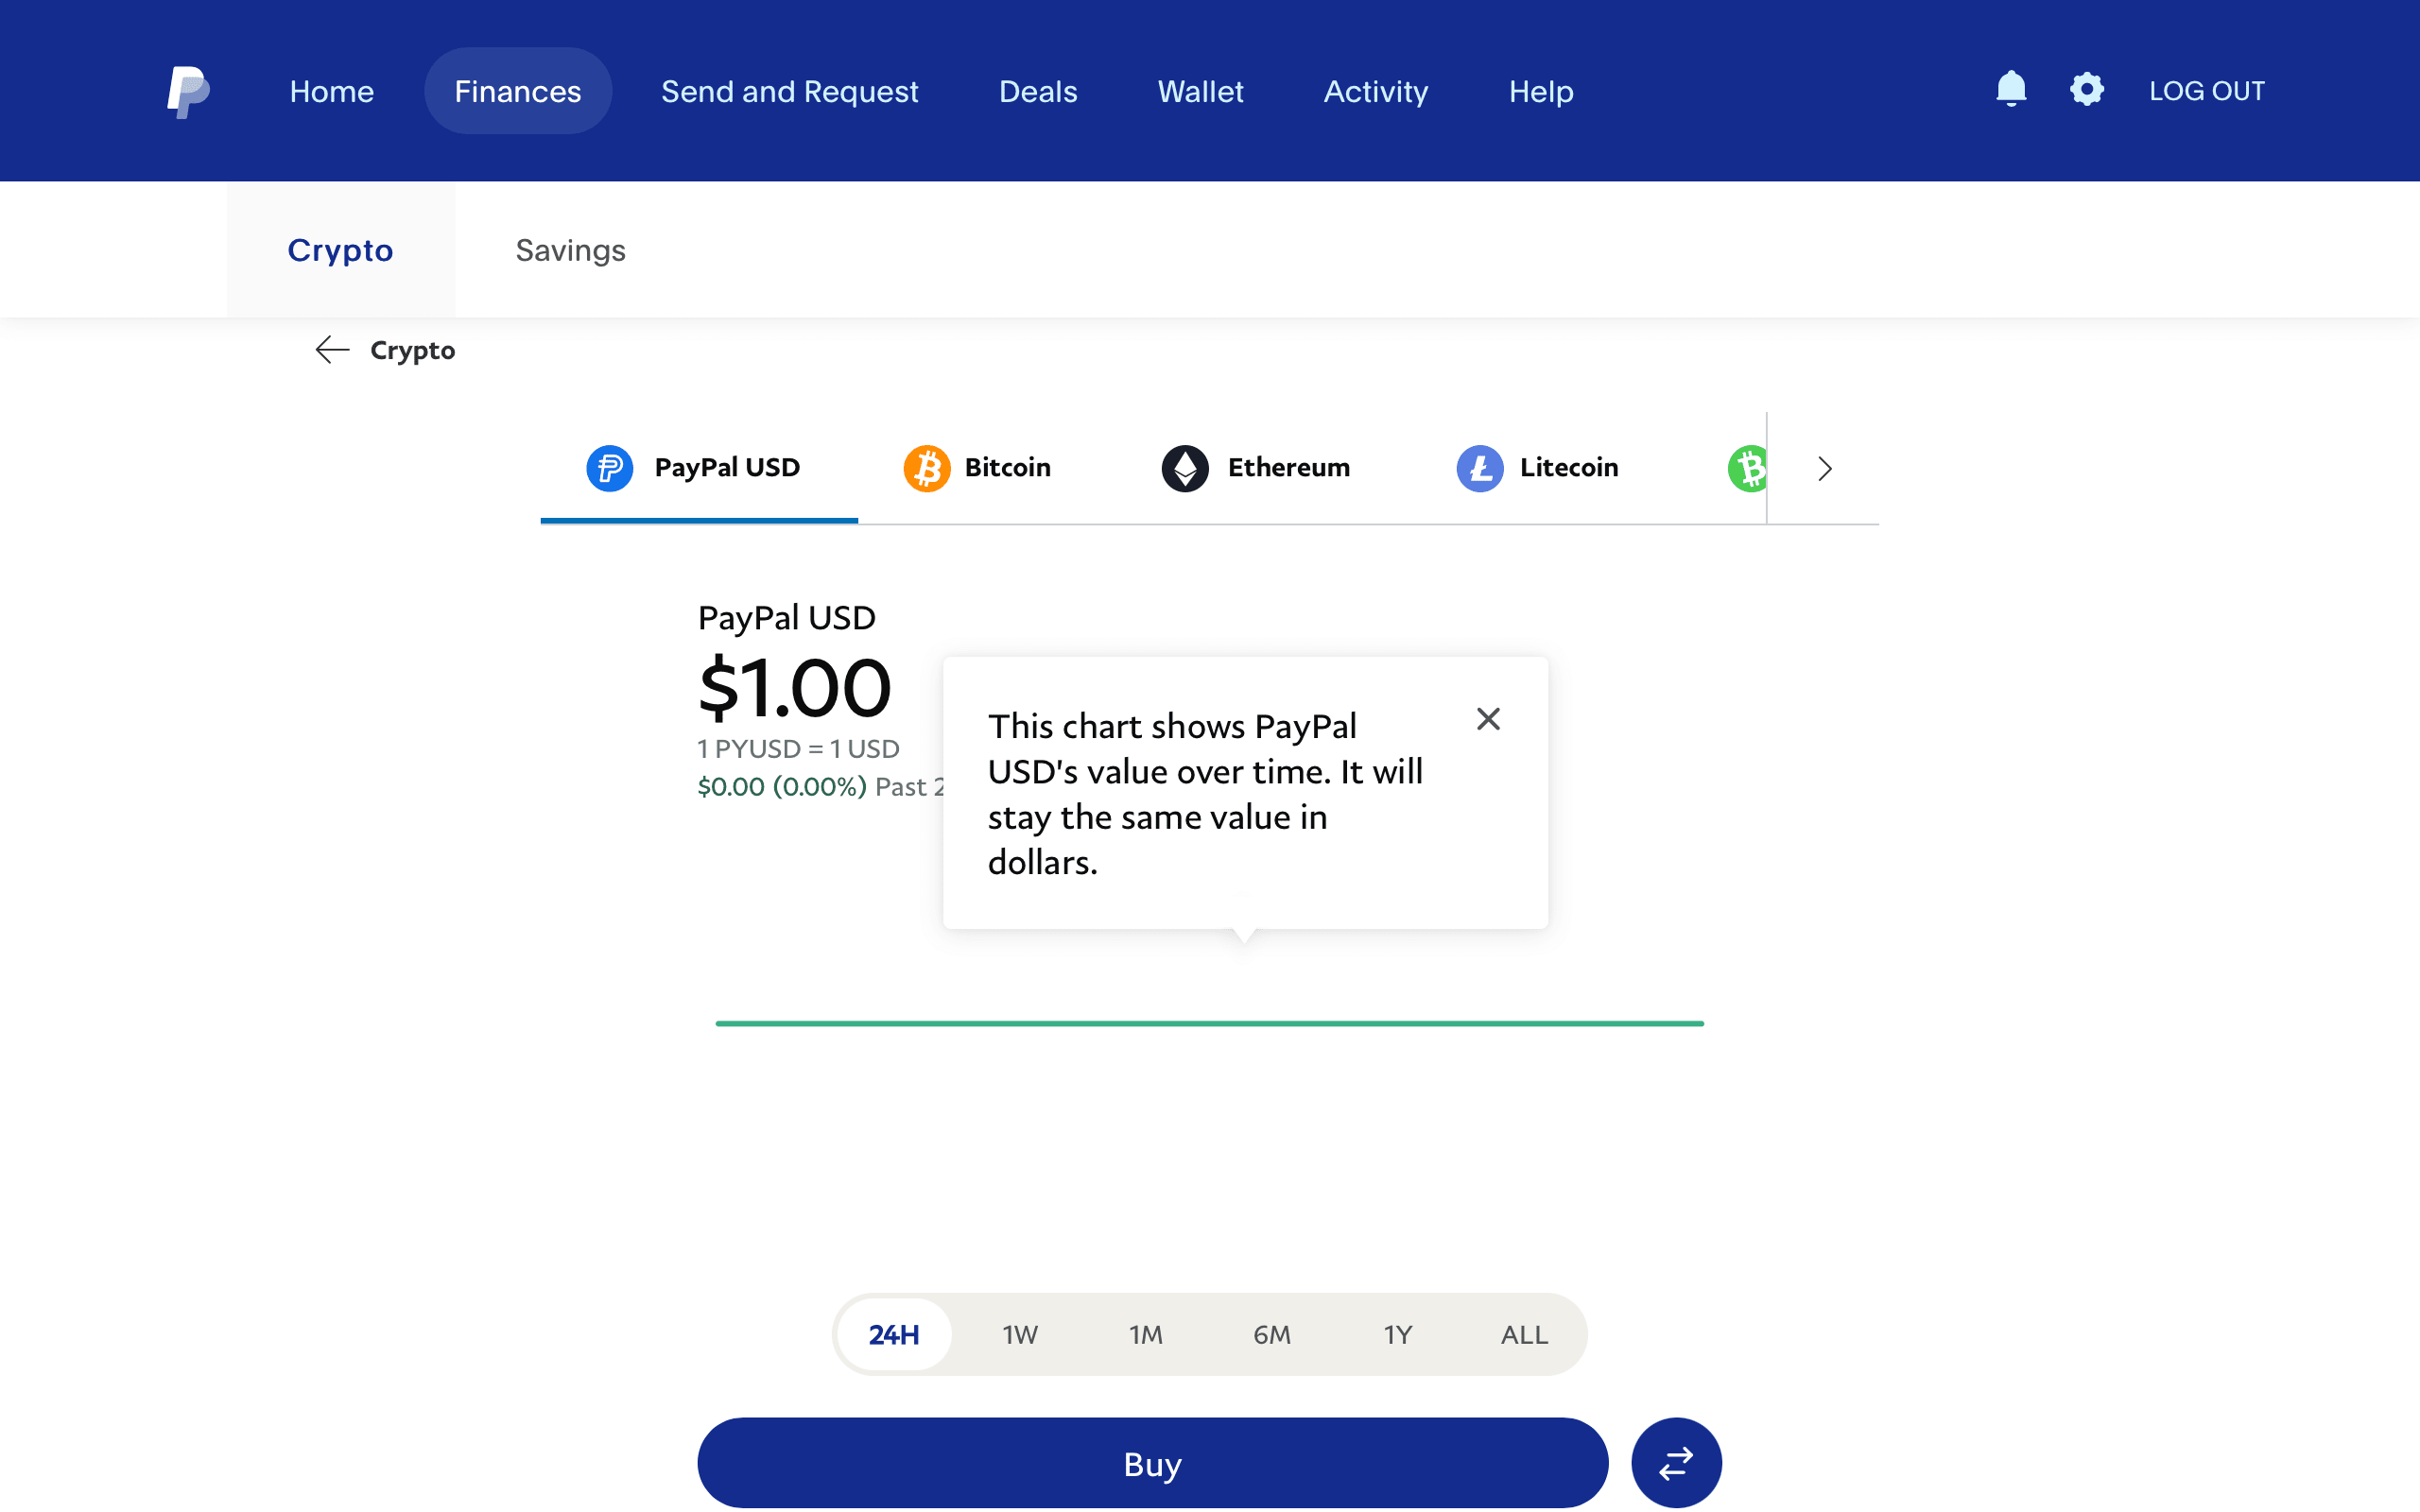 A screenshot showing PayPal's PYUSD section